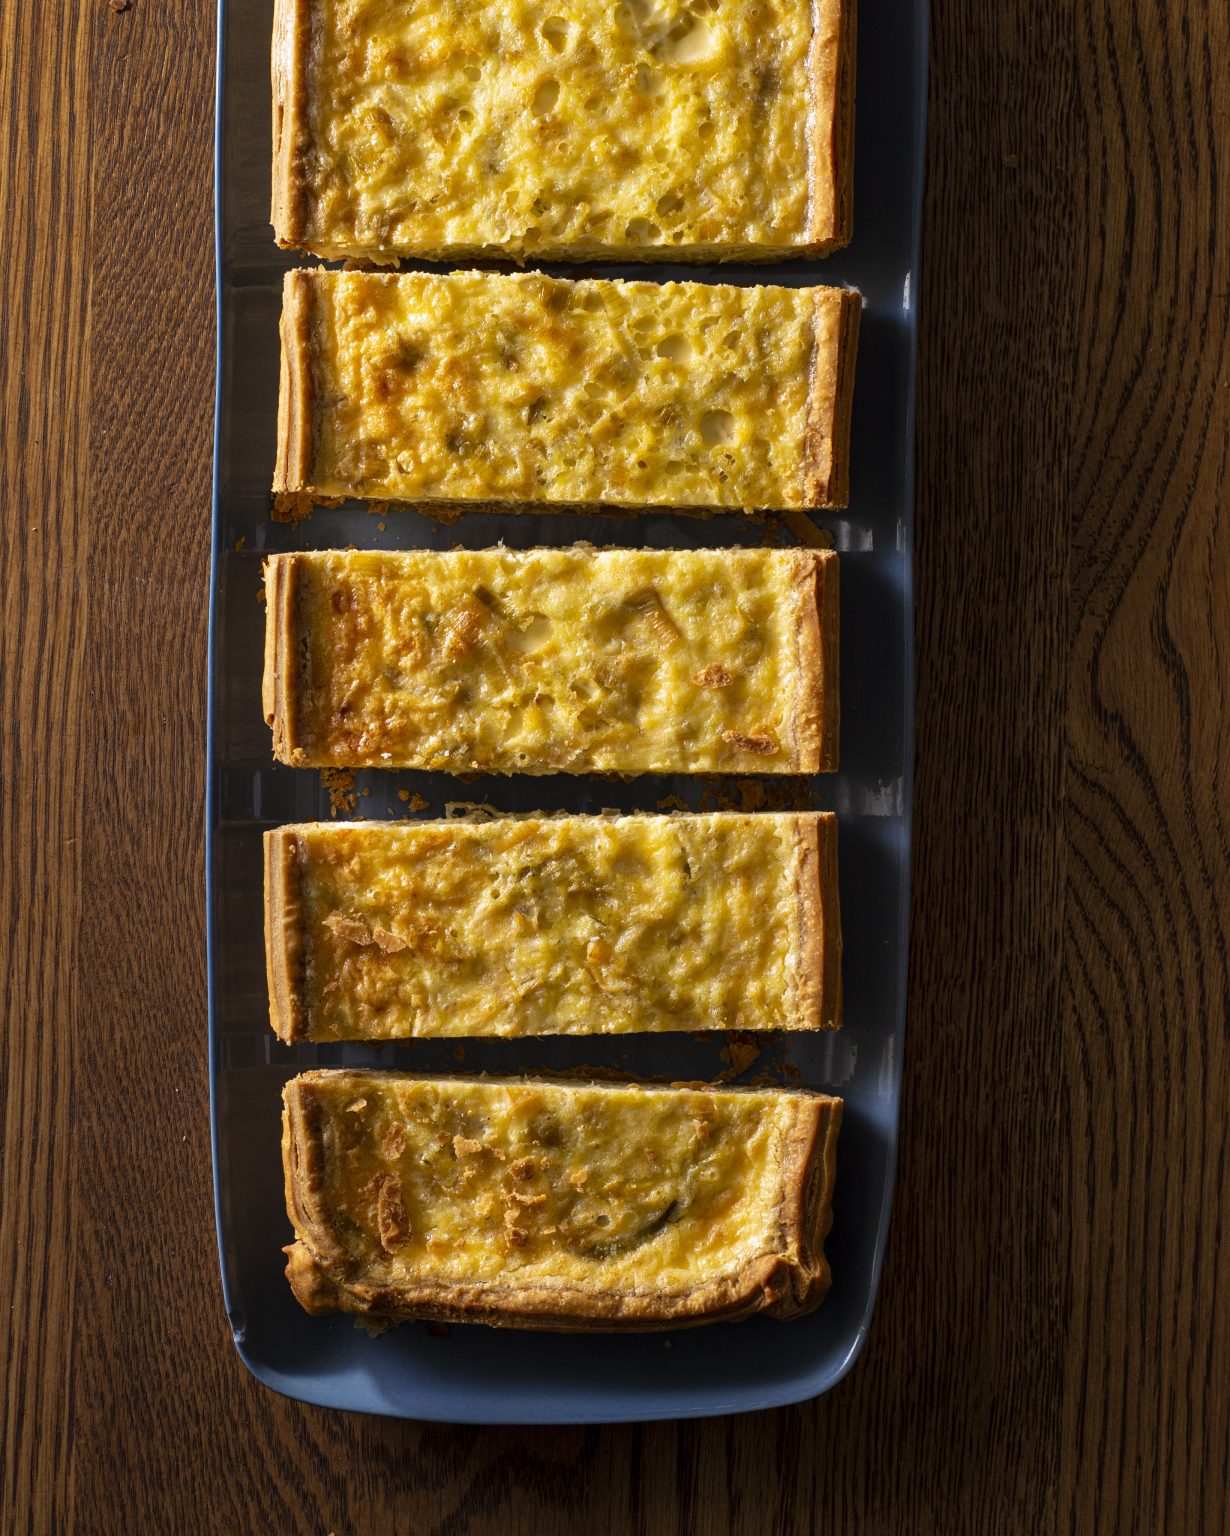 Leek and Gruyere tart: Savory, creamy, and utterly delicious